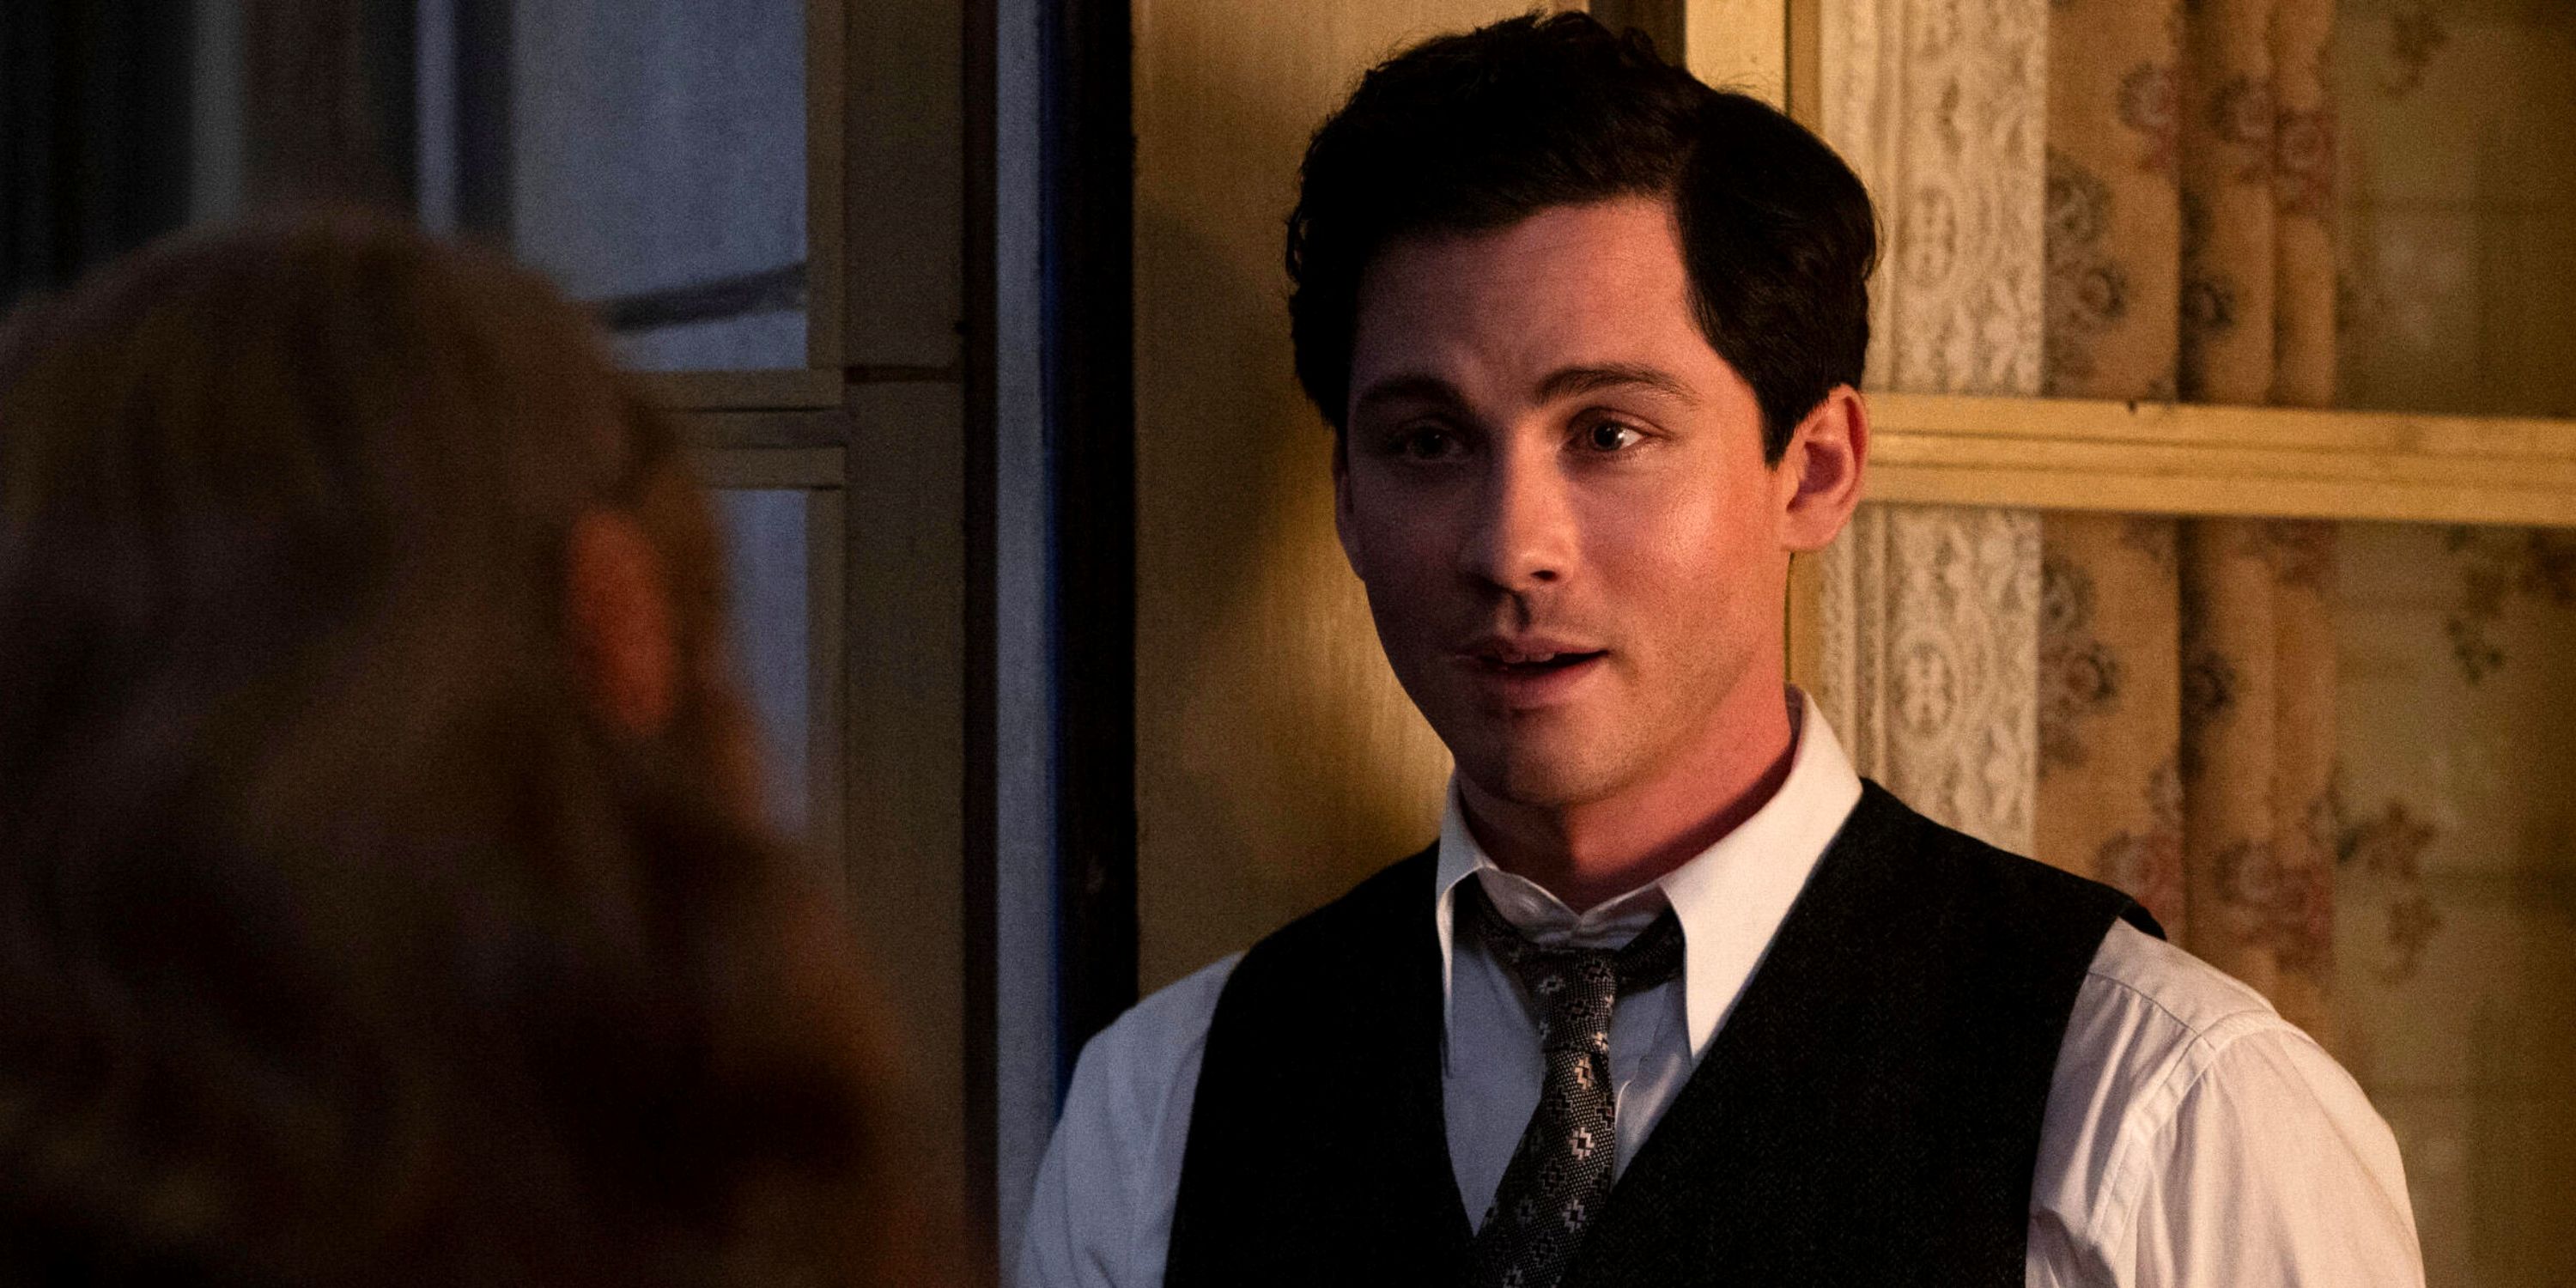 Logan Lerman as Addy Kurc in a suit and tie leaning against a wall in Episode 1 of We Were the Lucky Ones